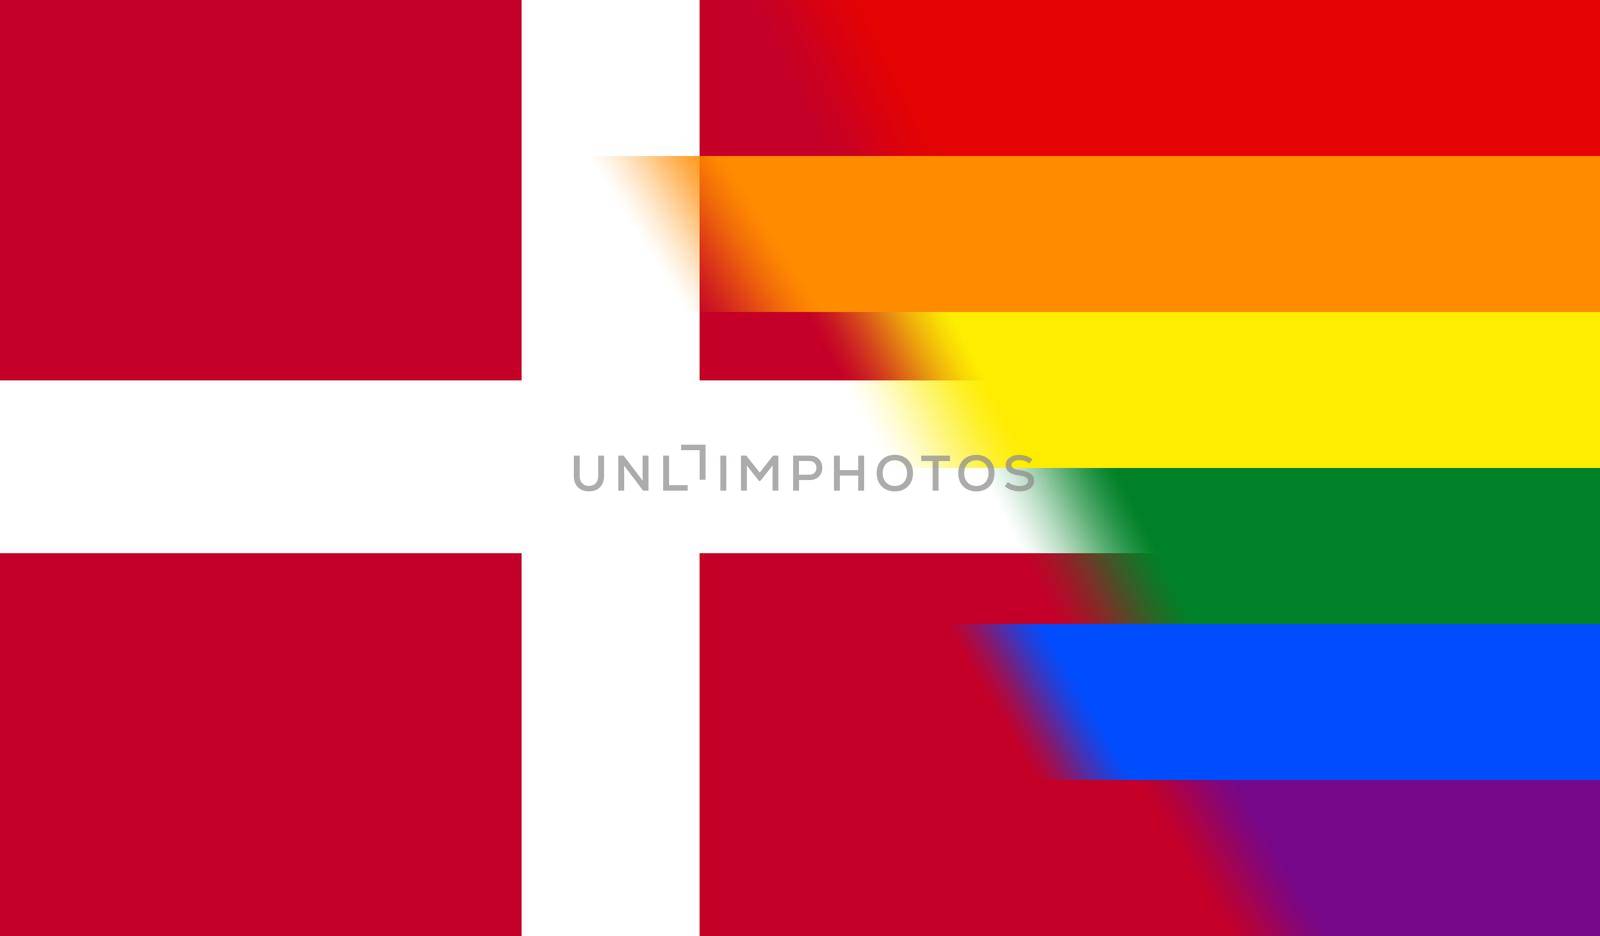 Top view of national lgbt flag of denmark, no flagpole. Plane design, layout. Flag background. Freedom and love concept, Pride month. activism, community and freedom